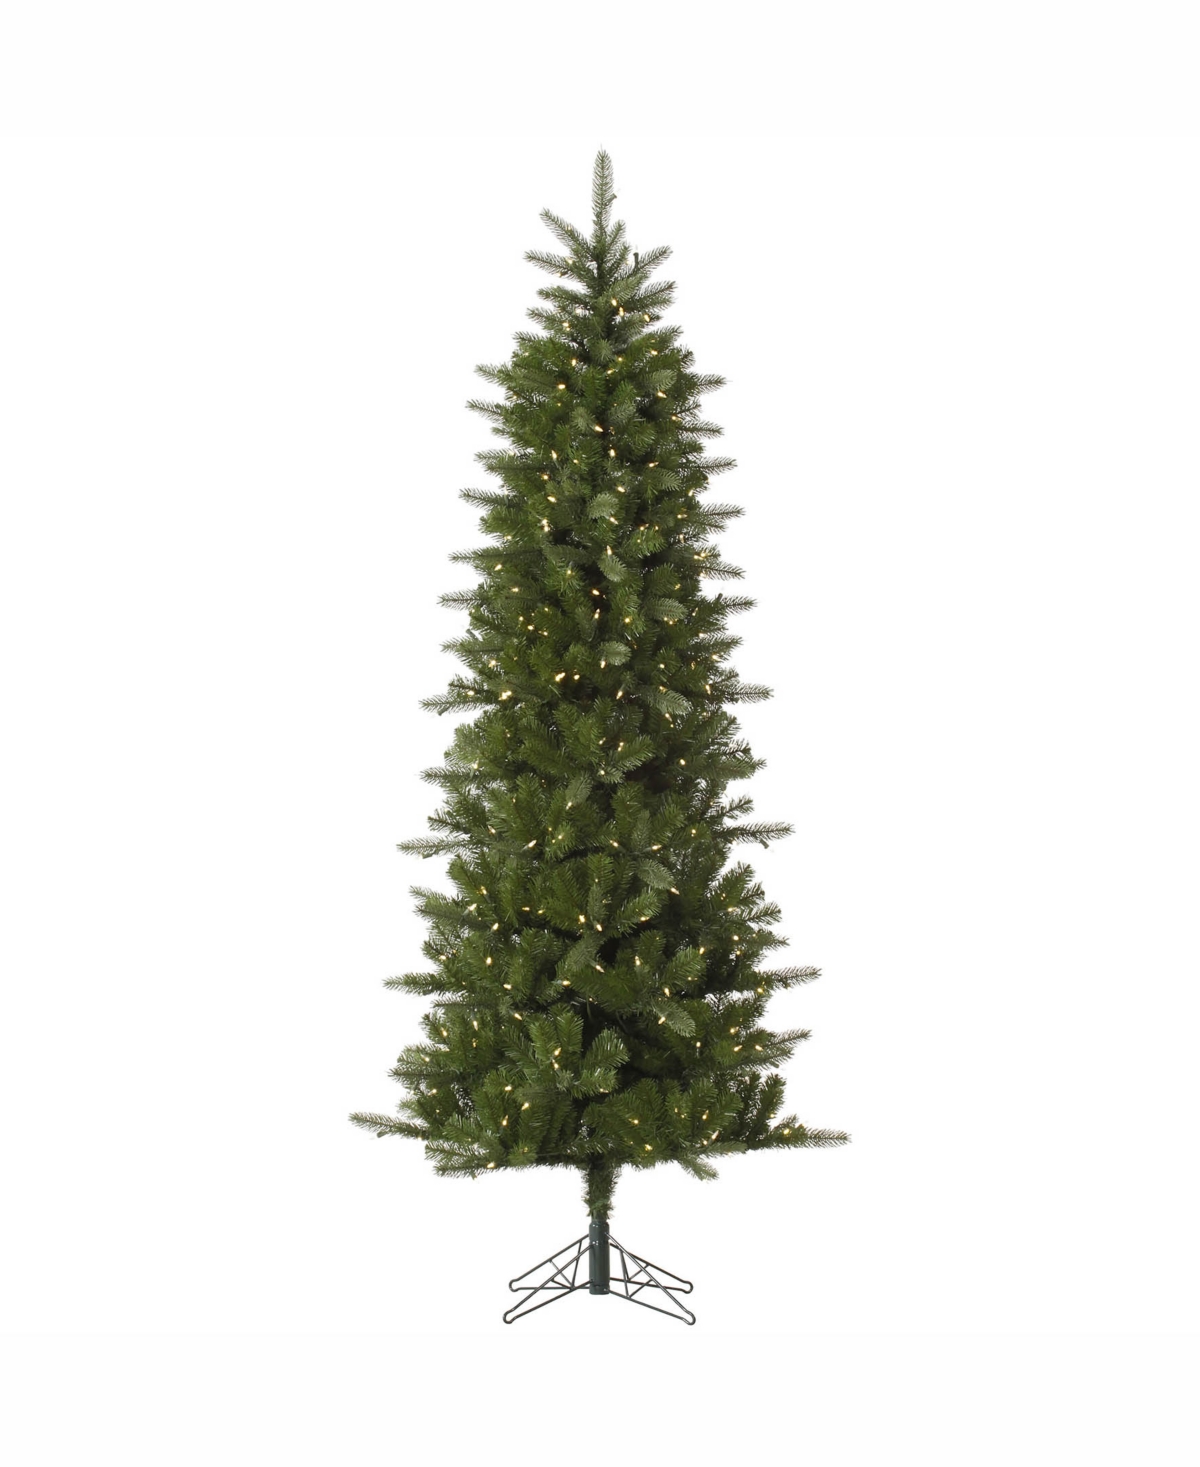 4.5 ft Carolina Pencil Spruce Artificial Christmas Tree With 200 Warm White Led Lights